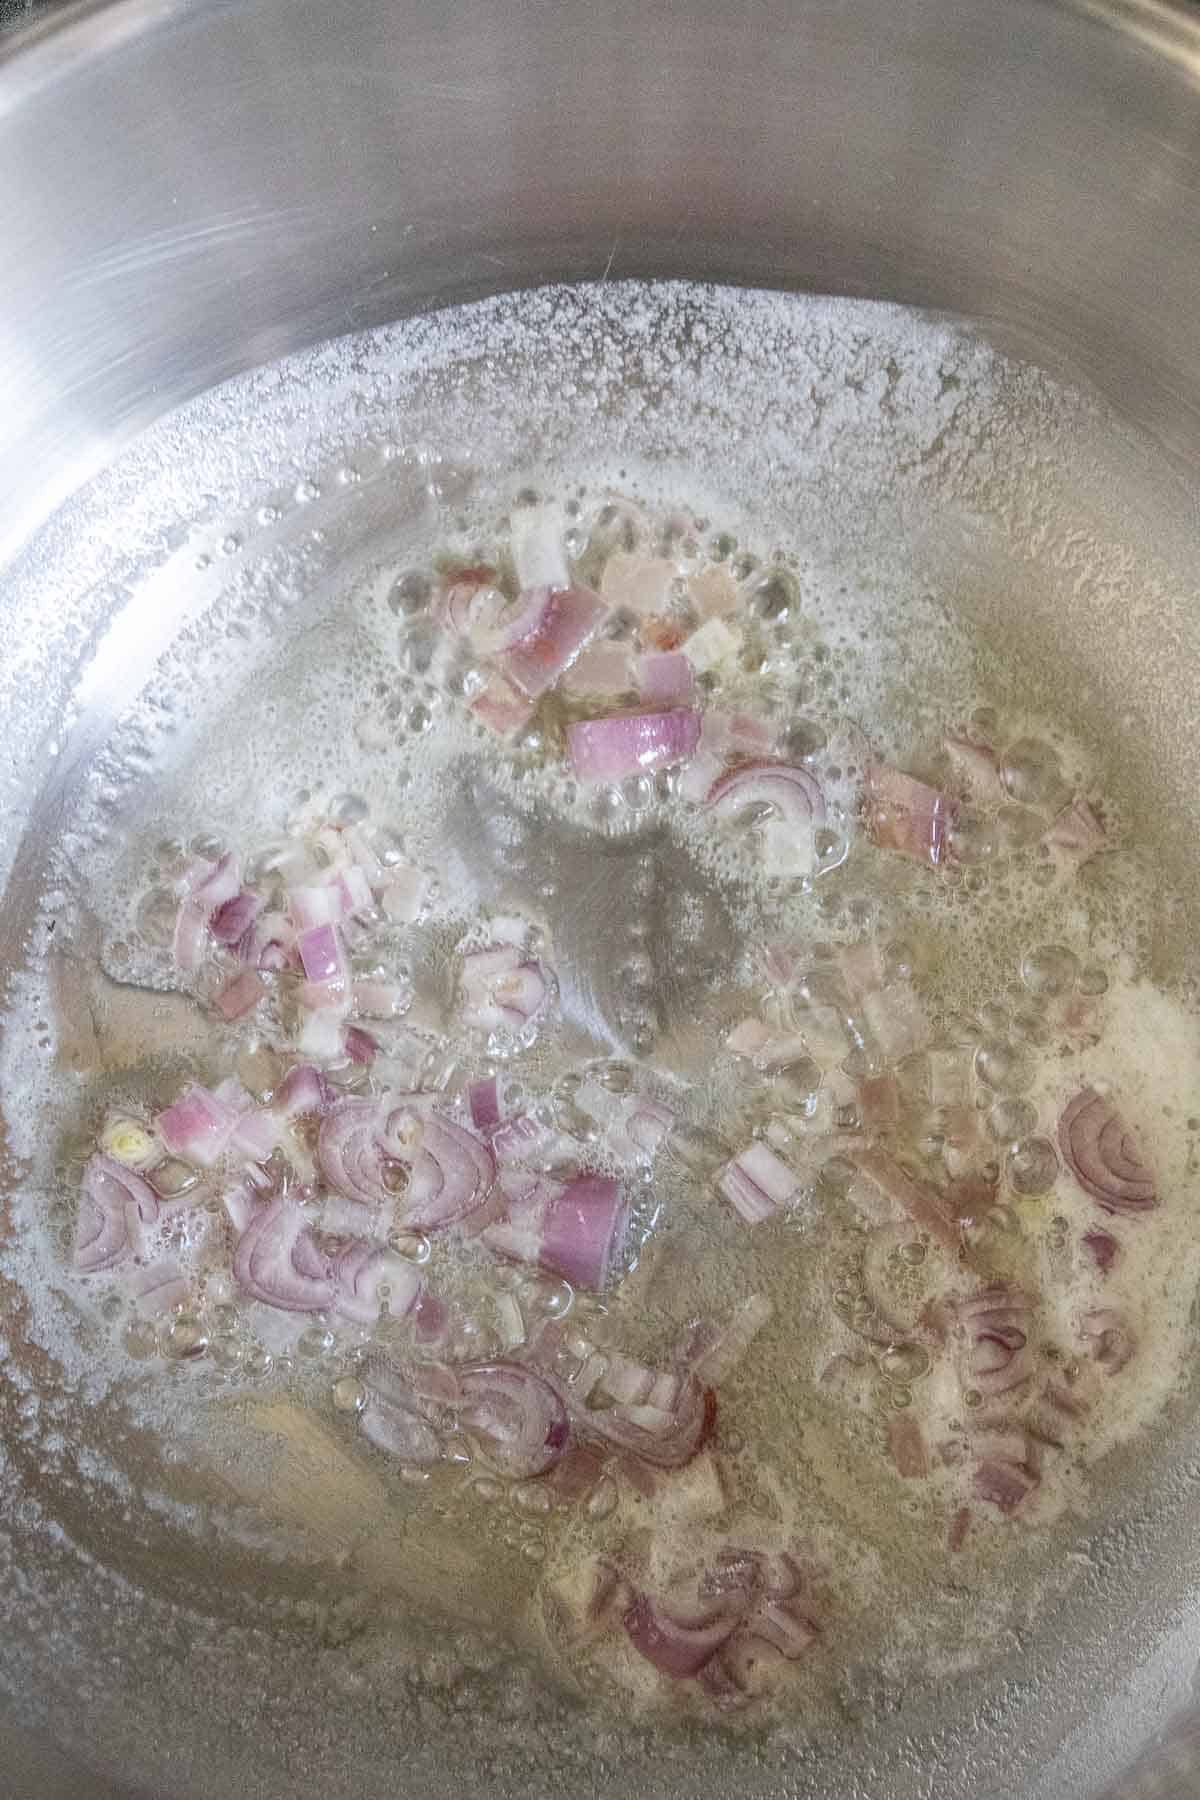 Shallots being sauteed in butter in a stainless steel saute pan.